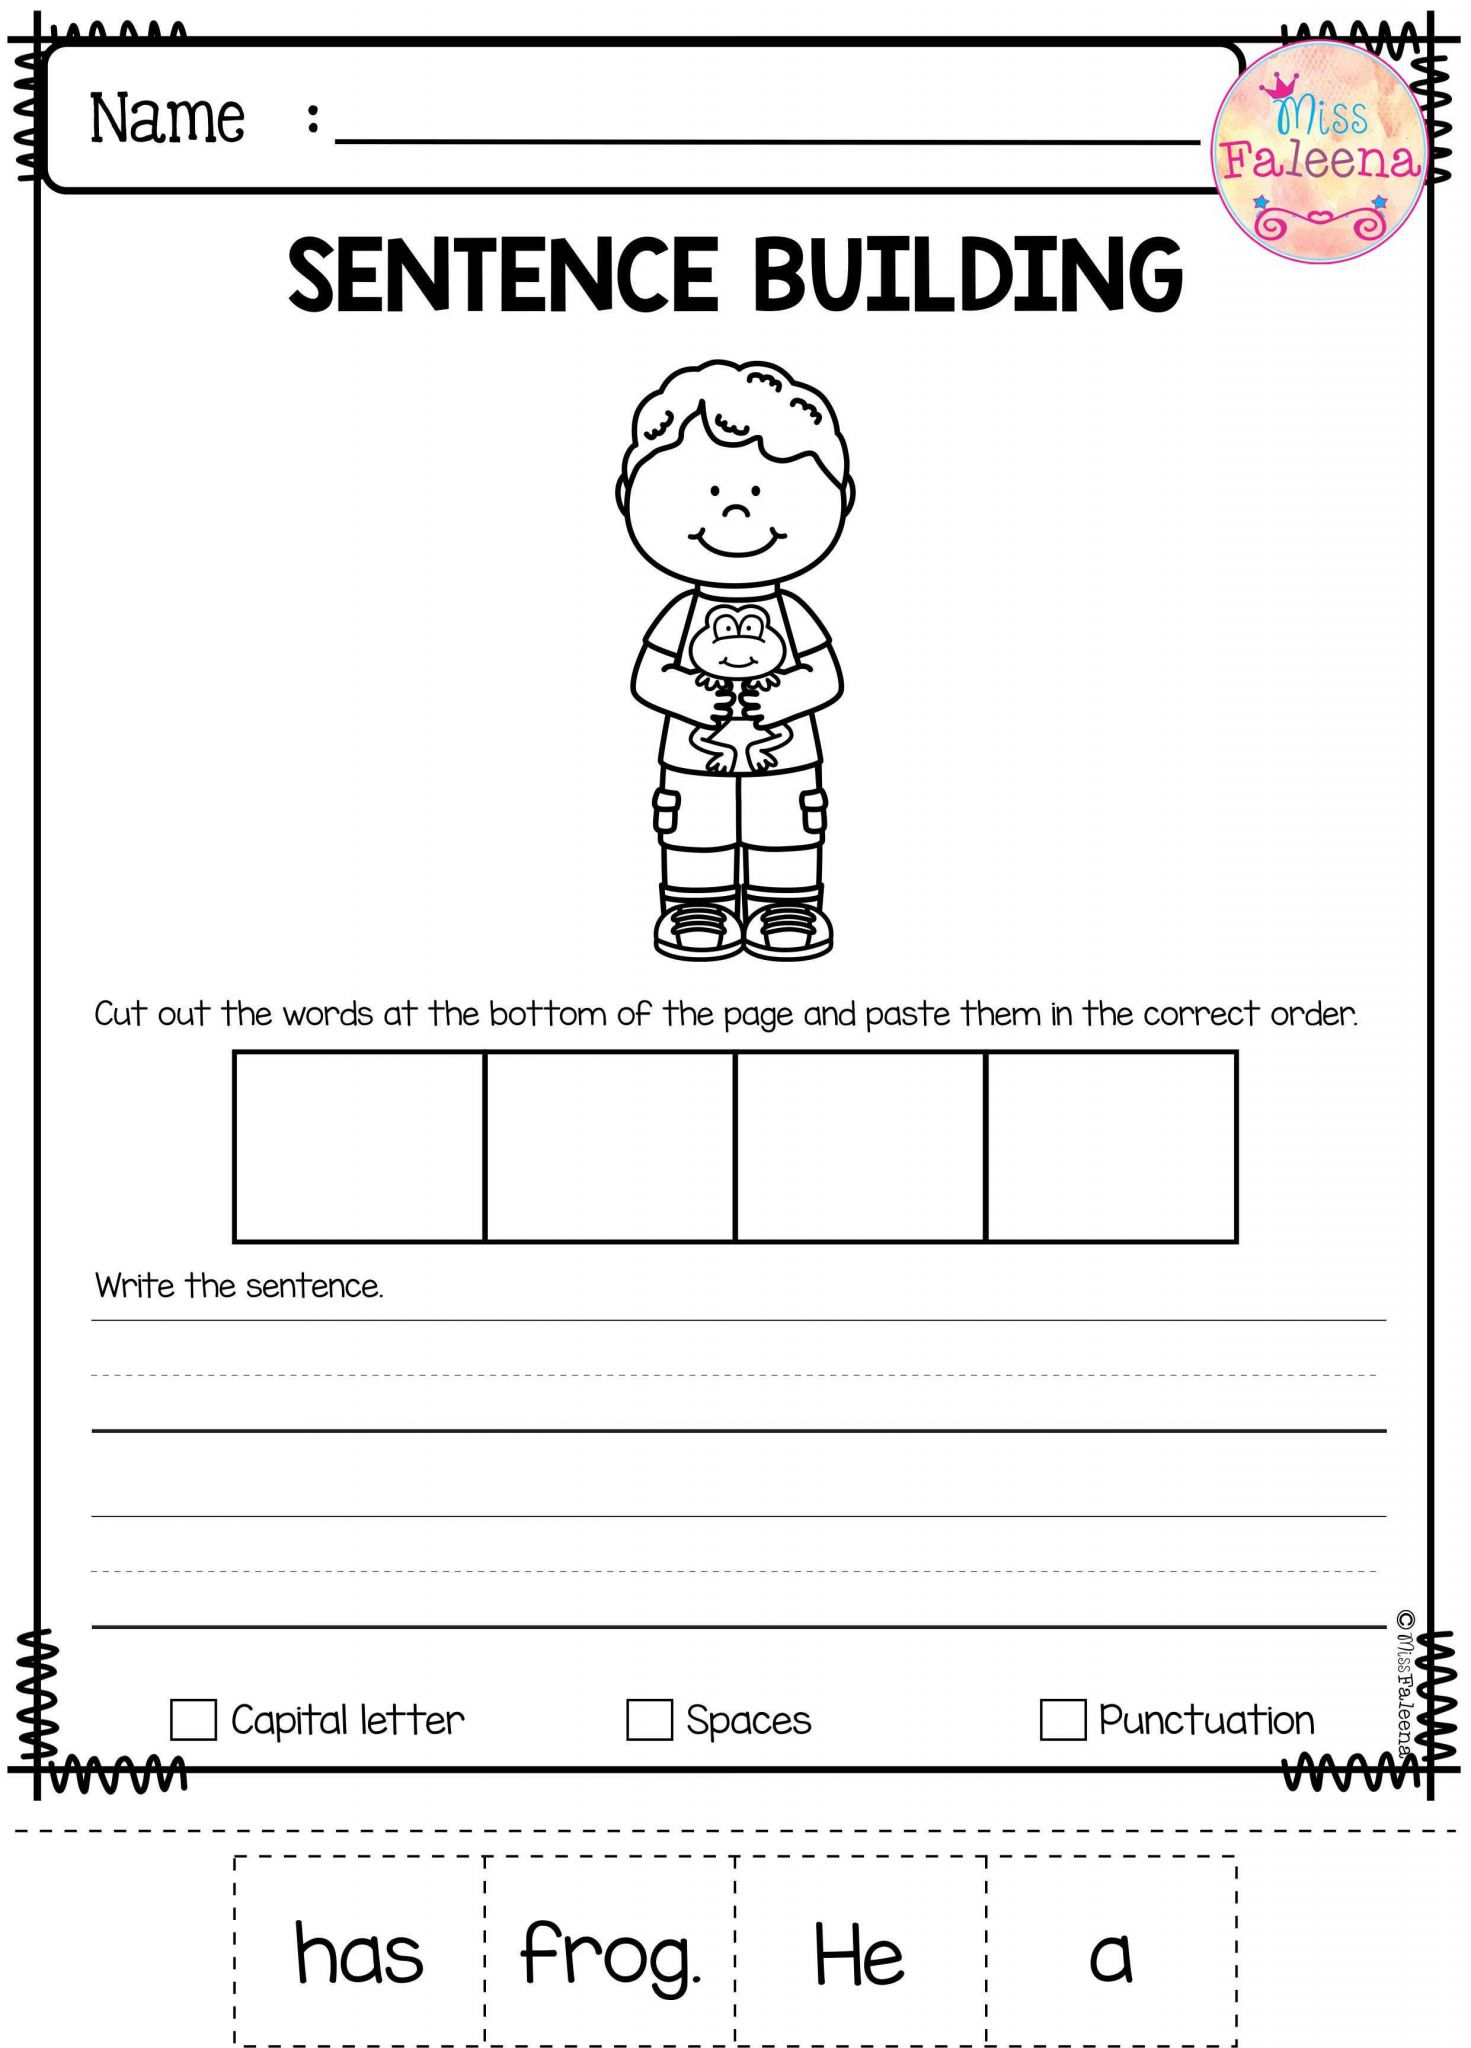 Sequences Practice Worksheet Also March Sentence Building